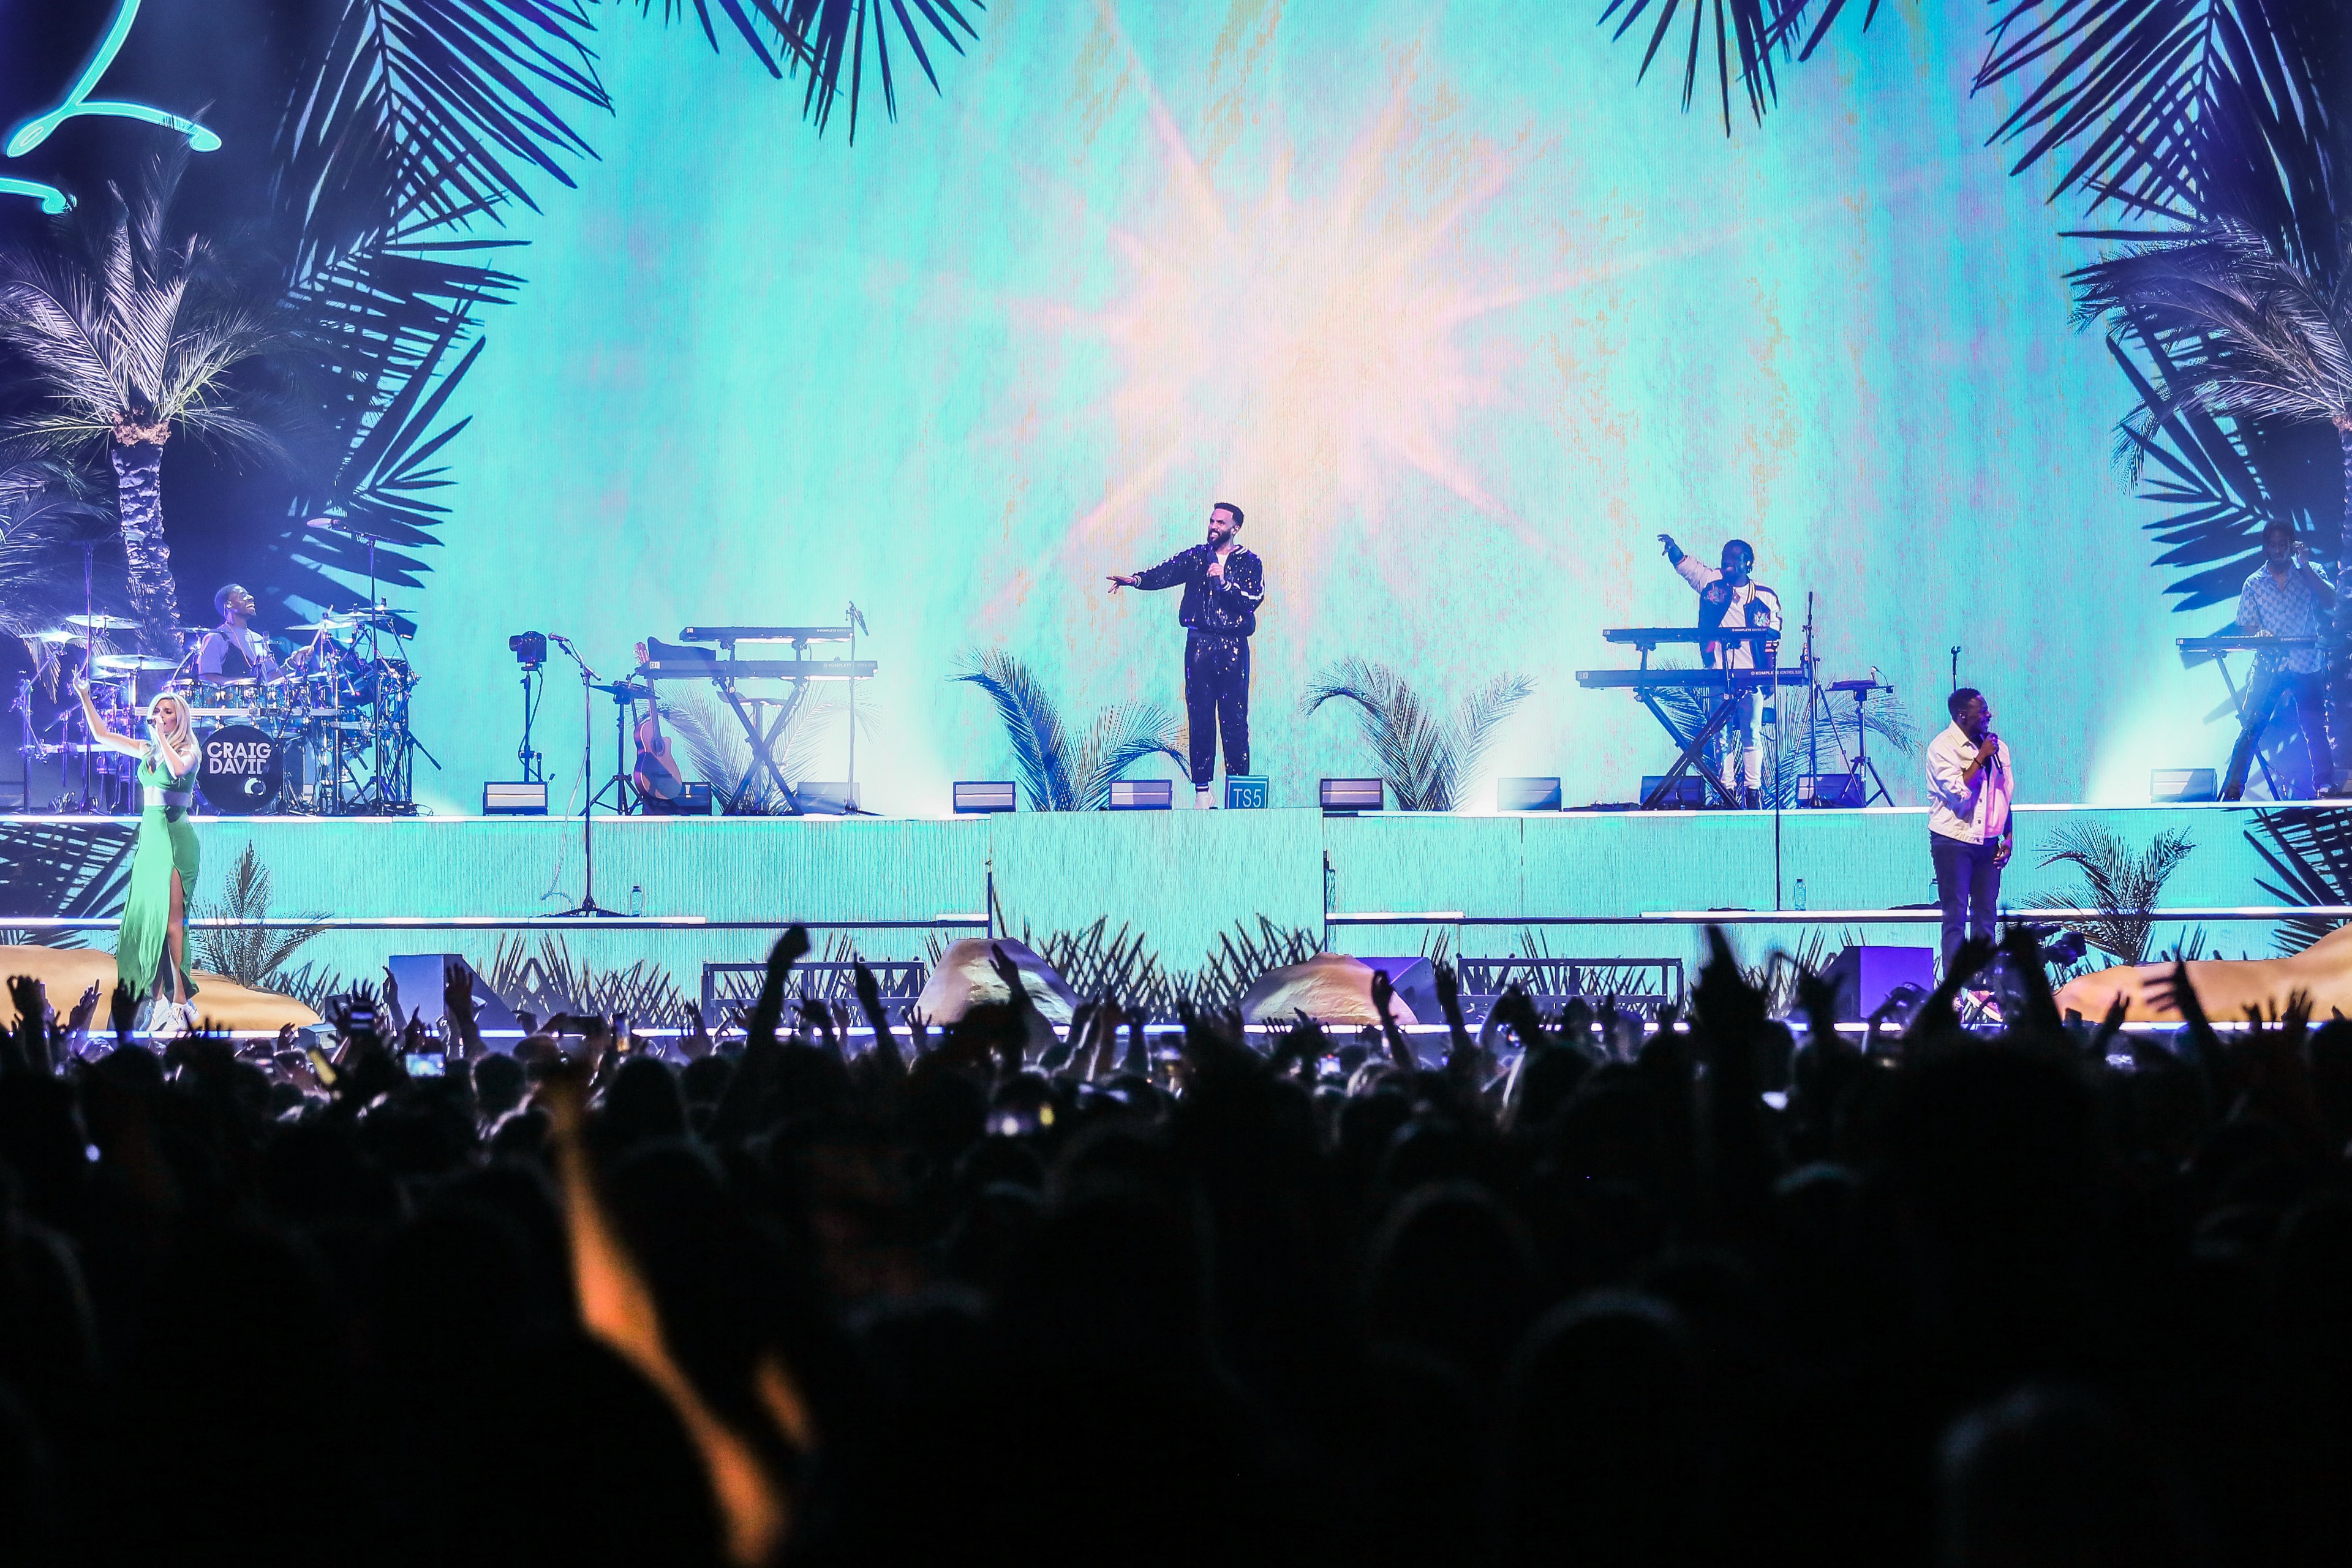 A concert scene with a band on stage, bright turquoise backdrop, palm silhouettes, and a cheering crowd.